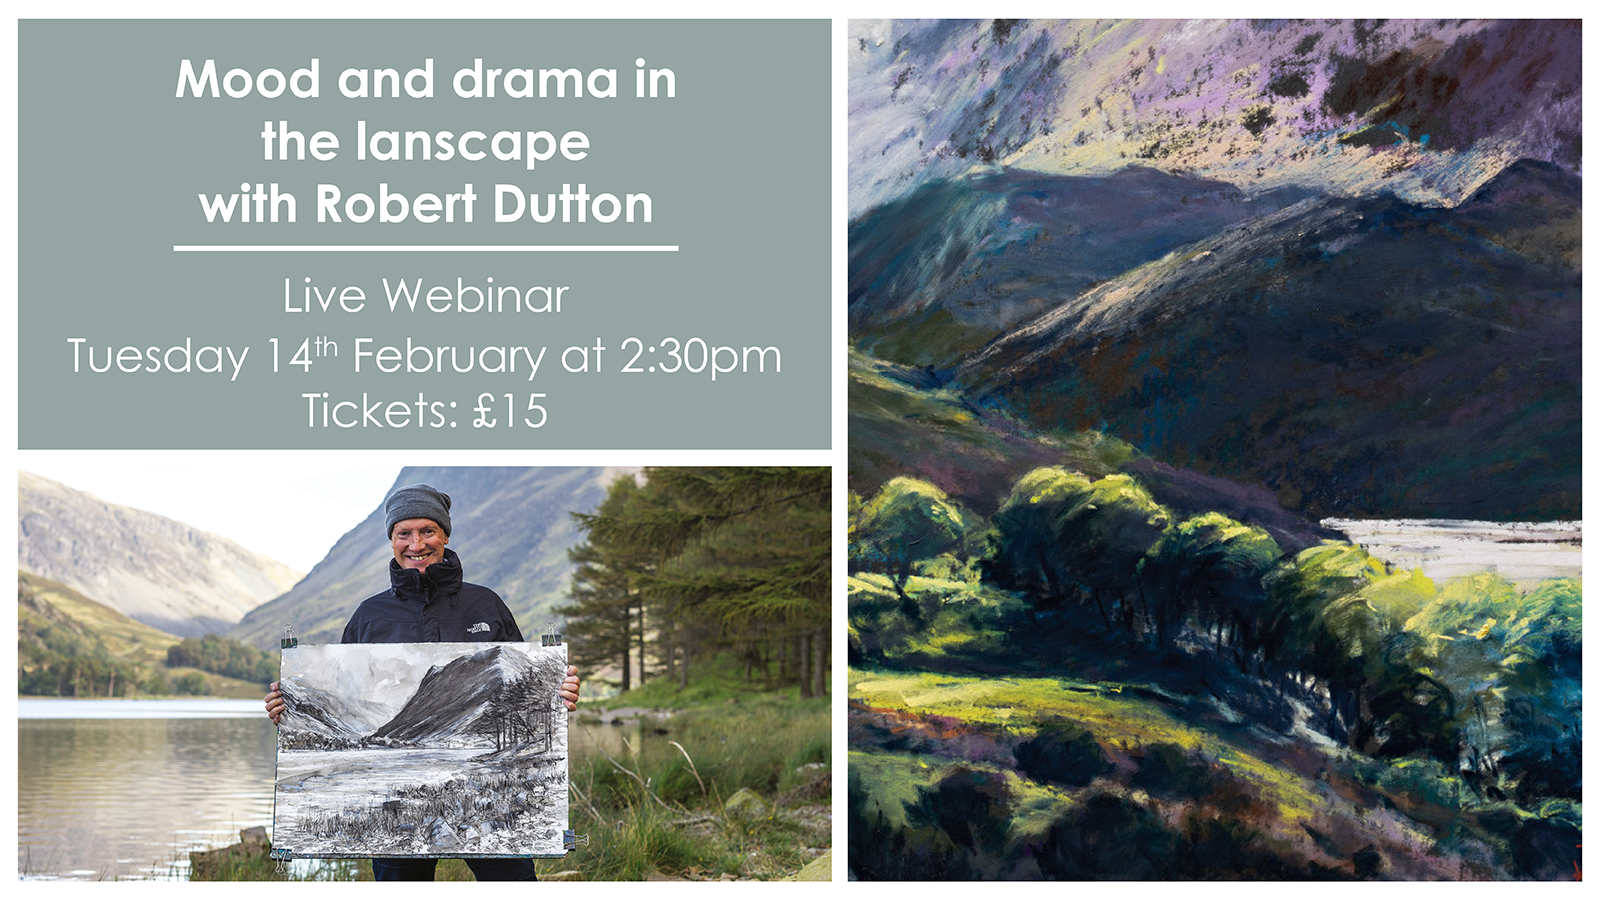 Mood and drama in the landscape with Robert Dutton